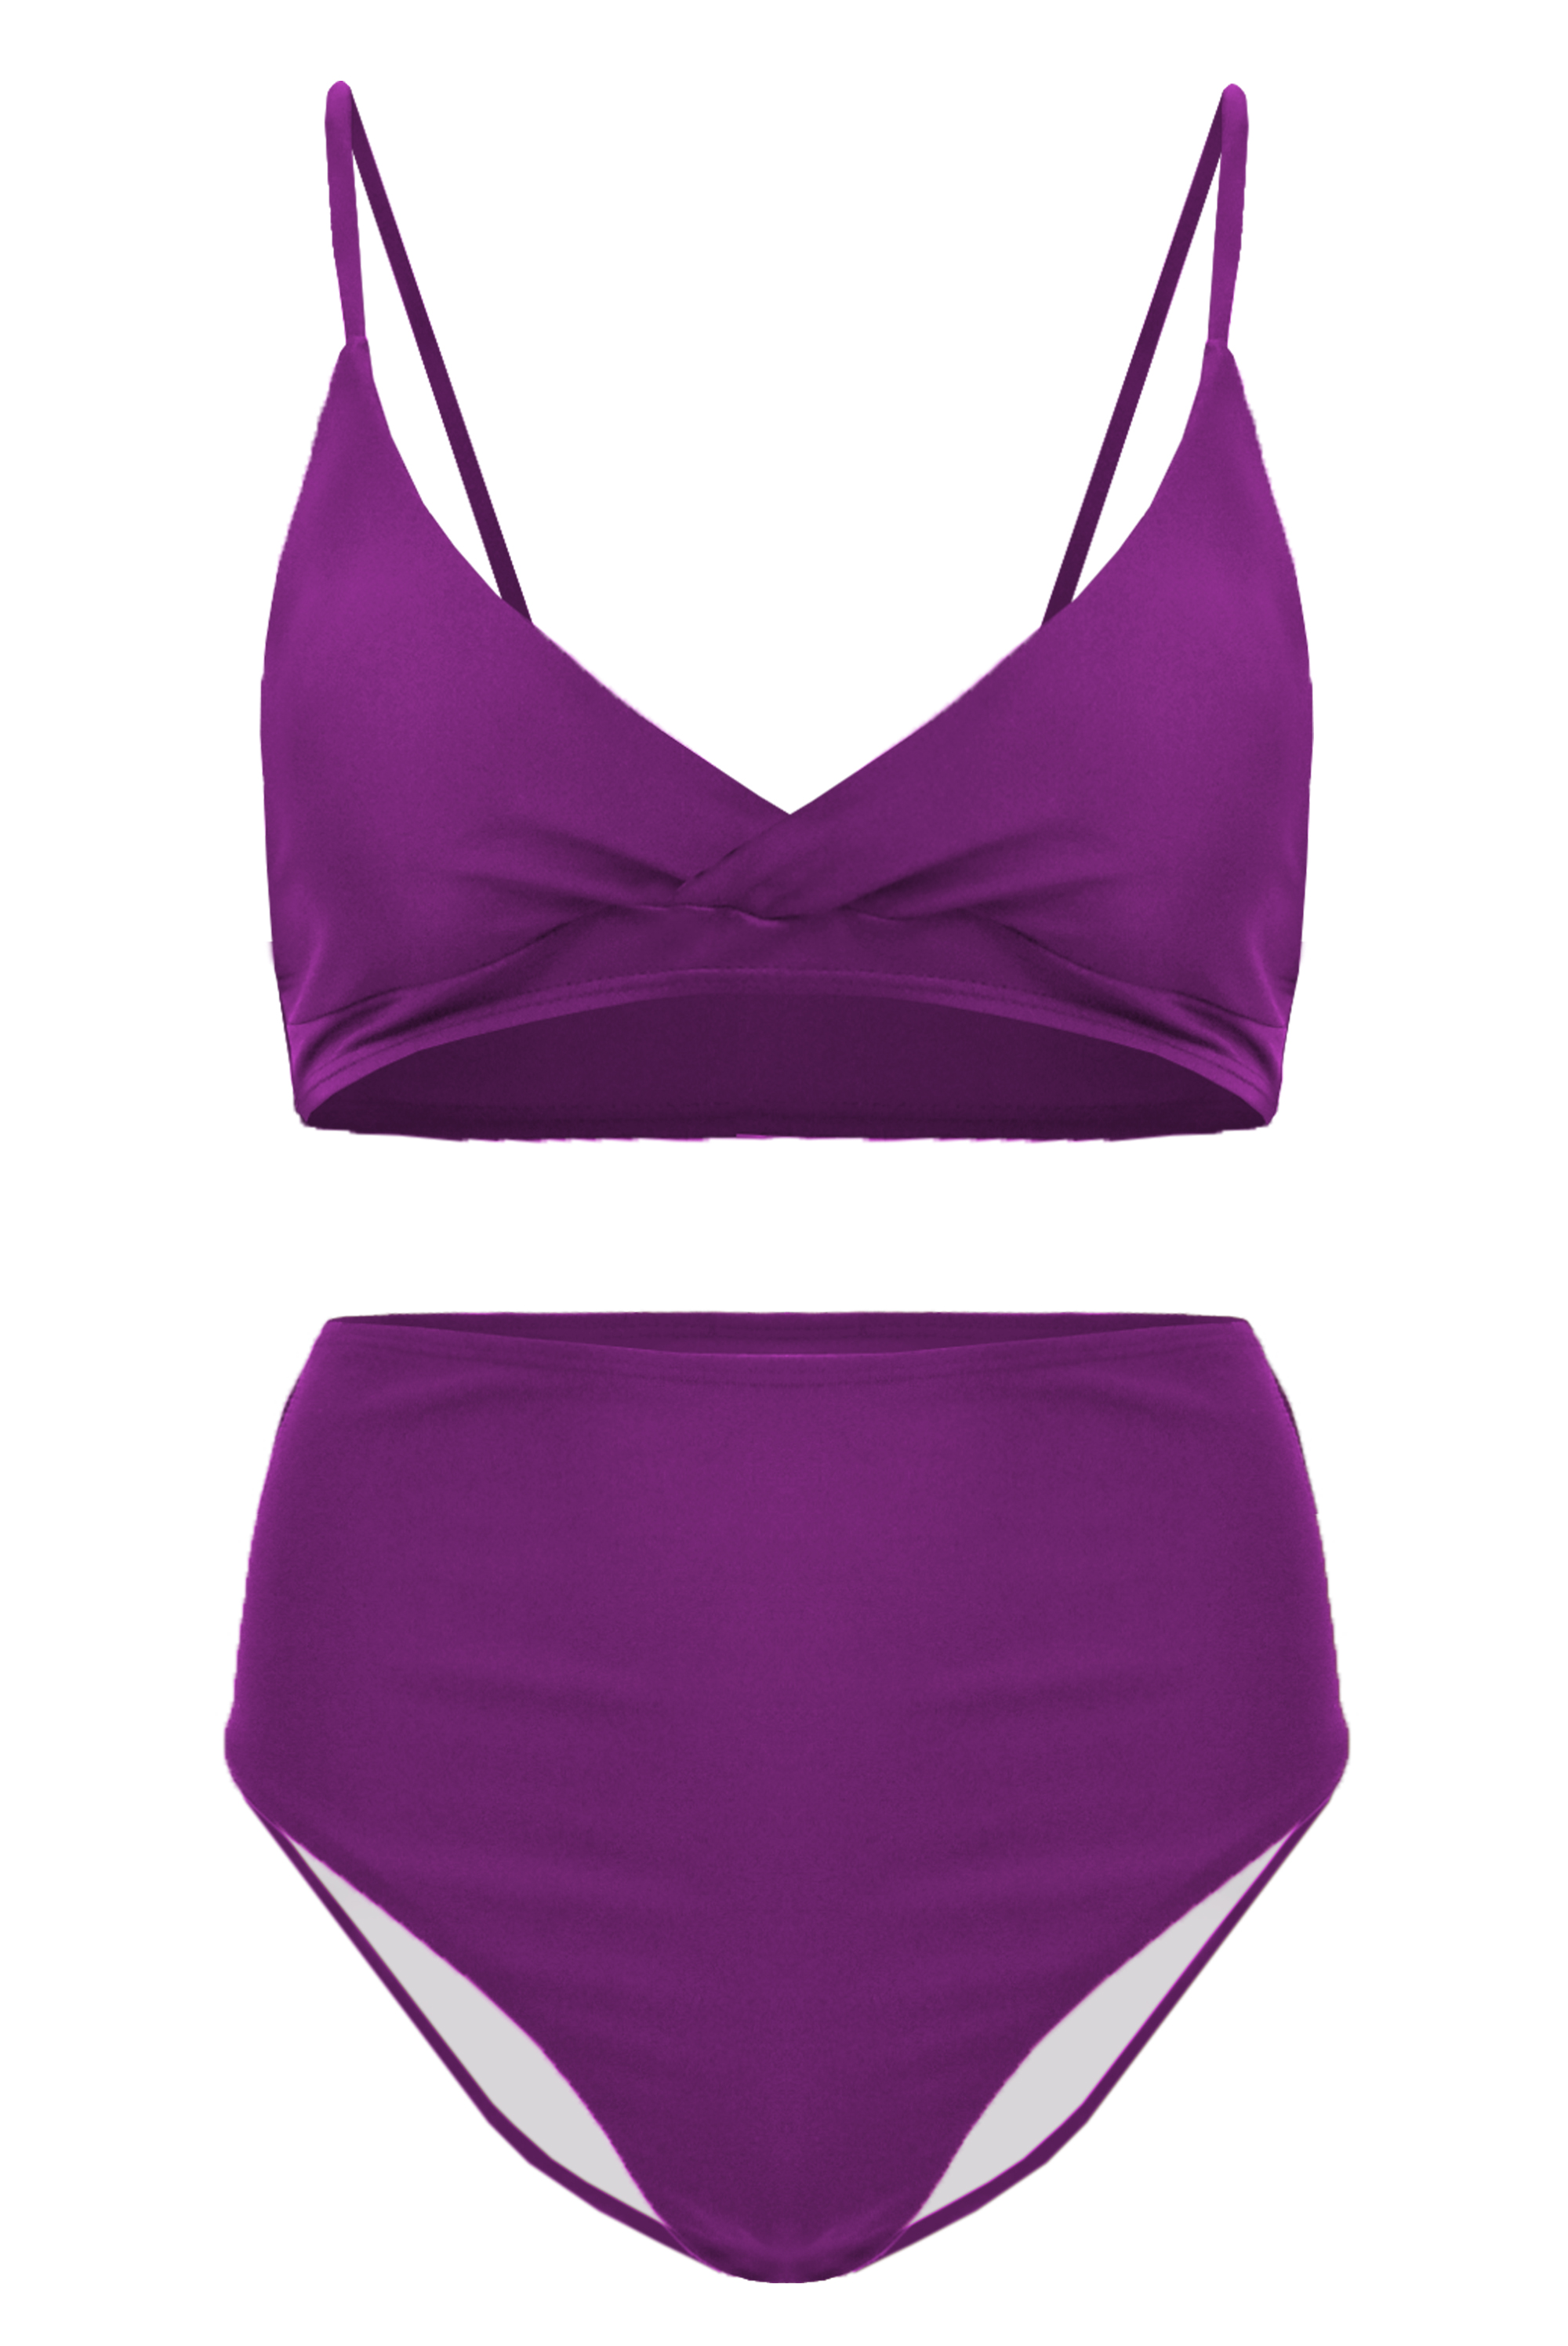 OEM Wholesale High Quality d cup loose tankini bathing suits